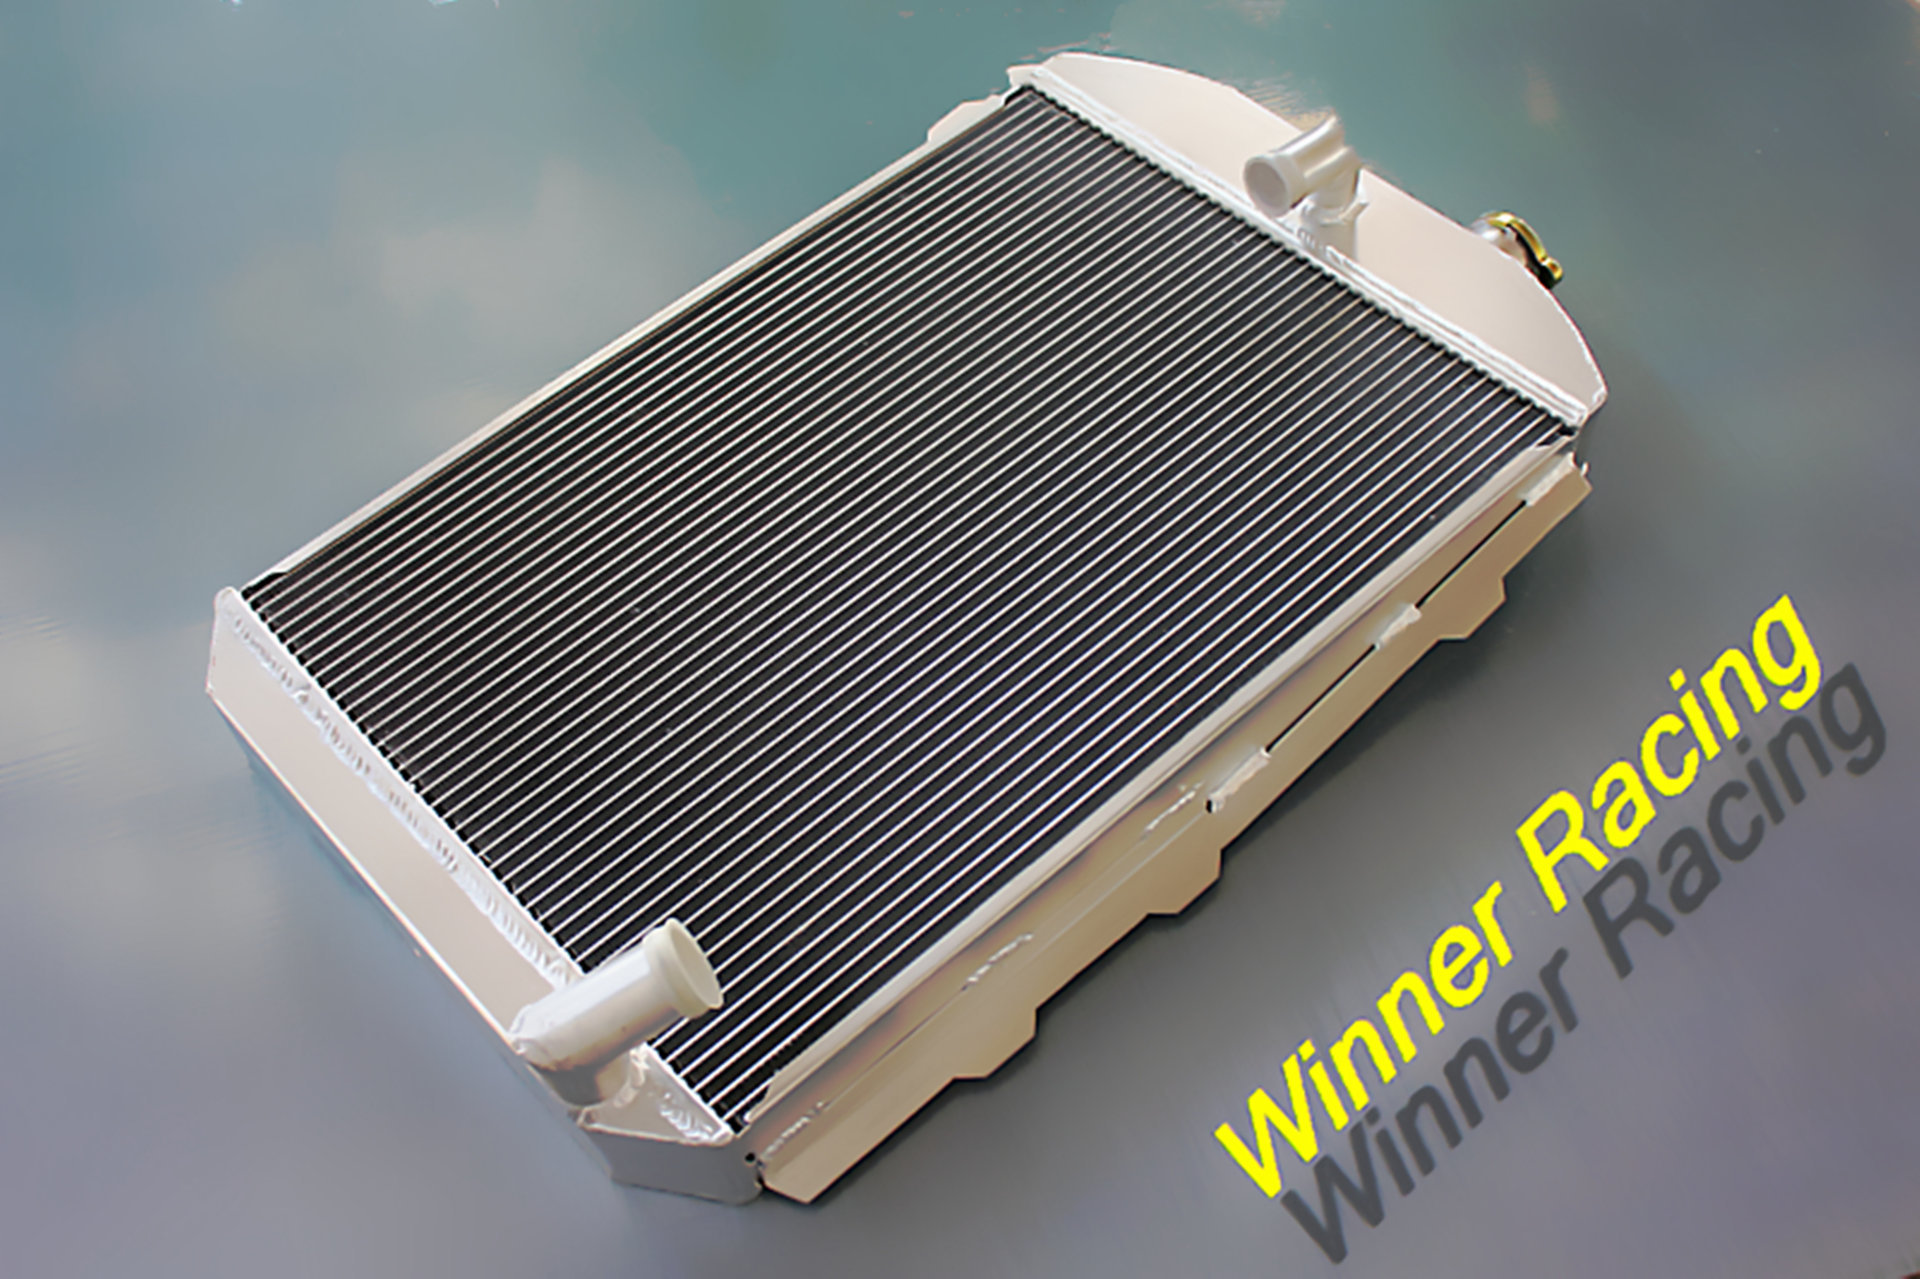   56MM ALUMINUM RADIATOR FOR CHEVY HOT/STREET ROD 6 Cylinder /CYL.   700HP 1938